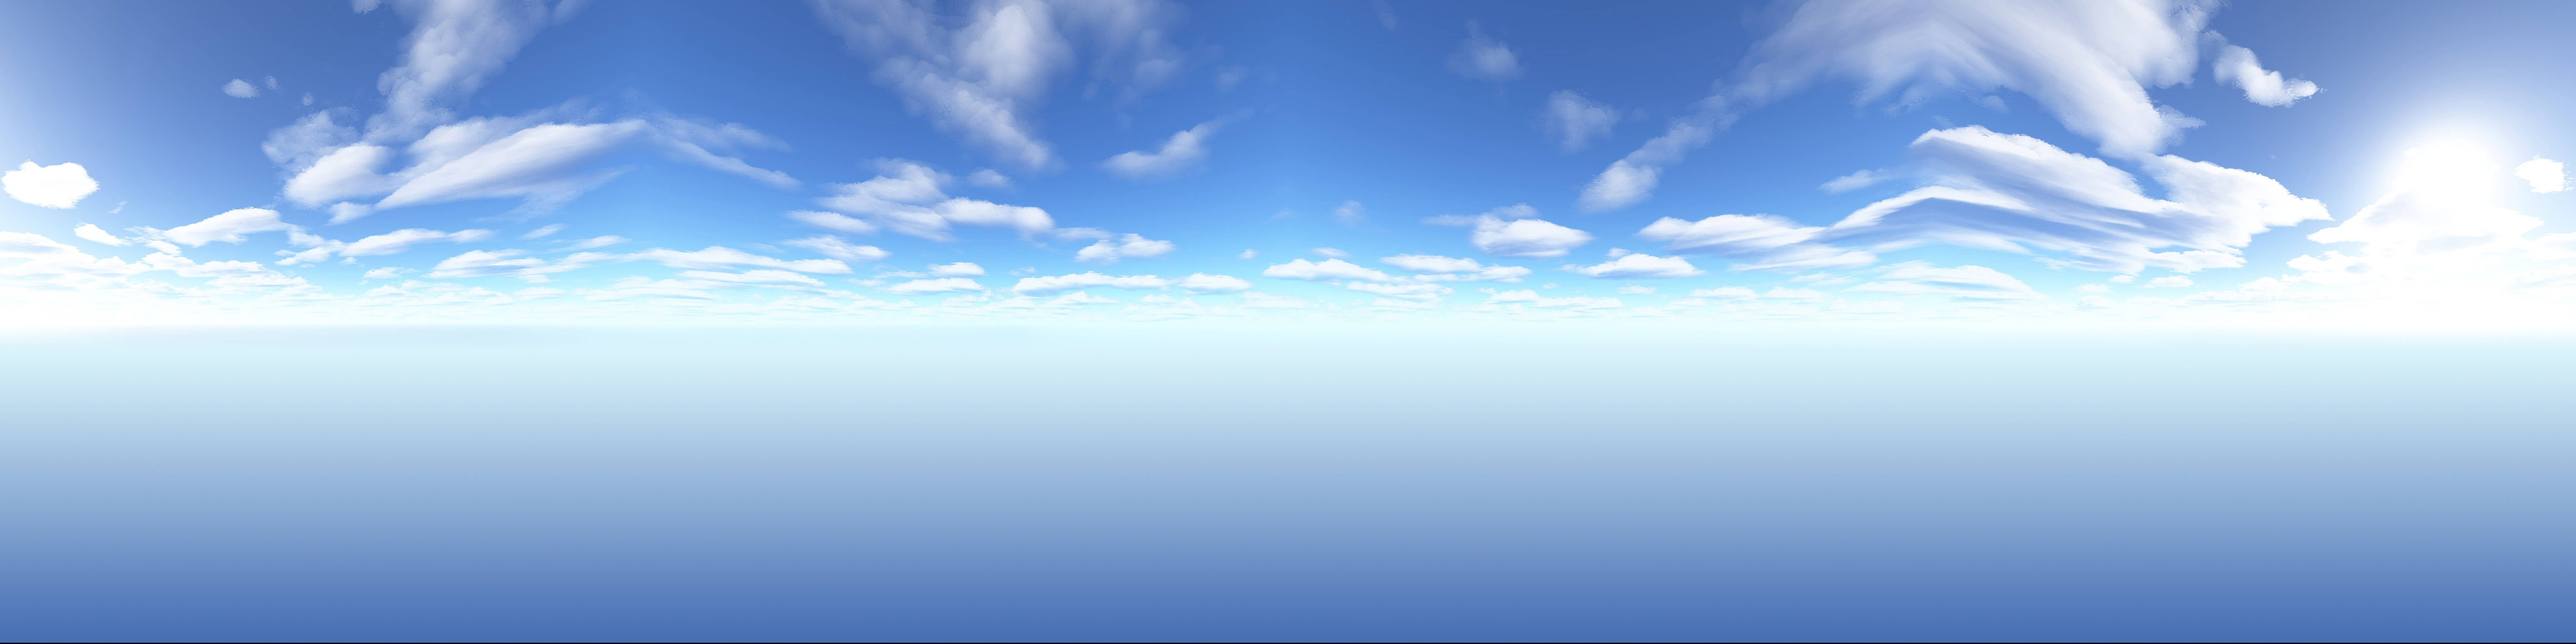 4k Dual Monitor Screen Blue Sky Picture